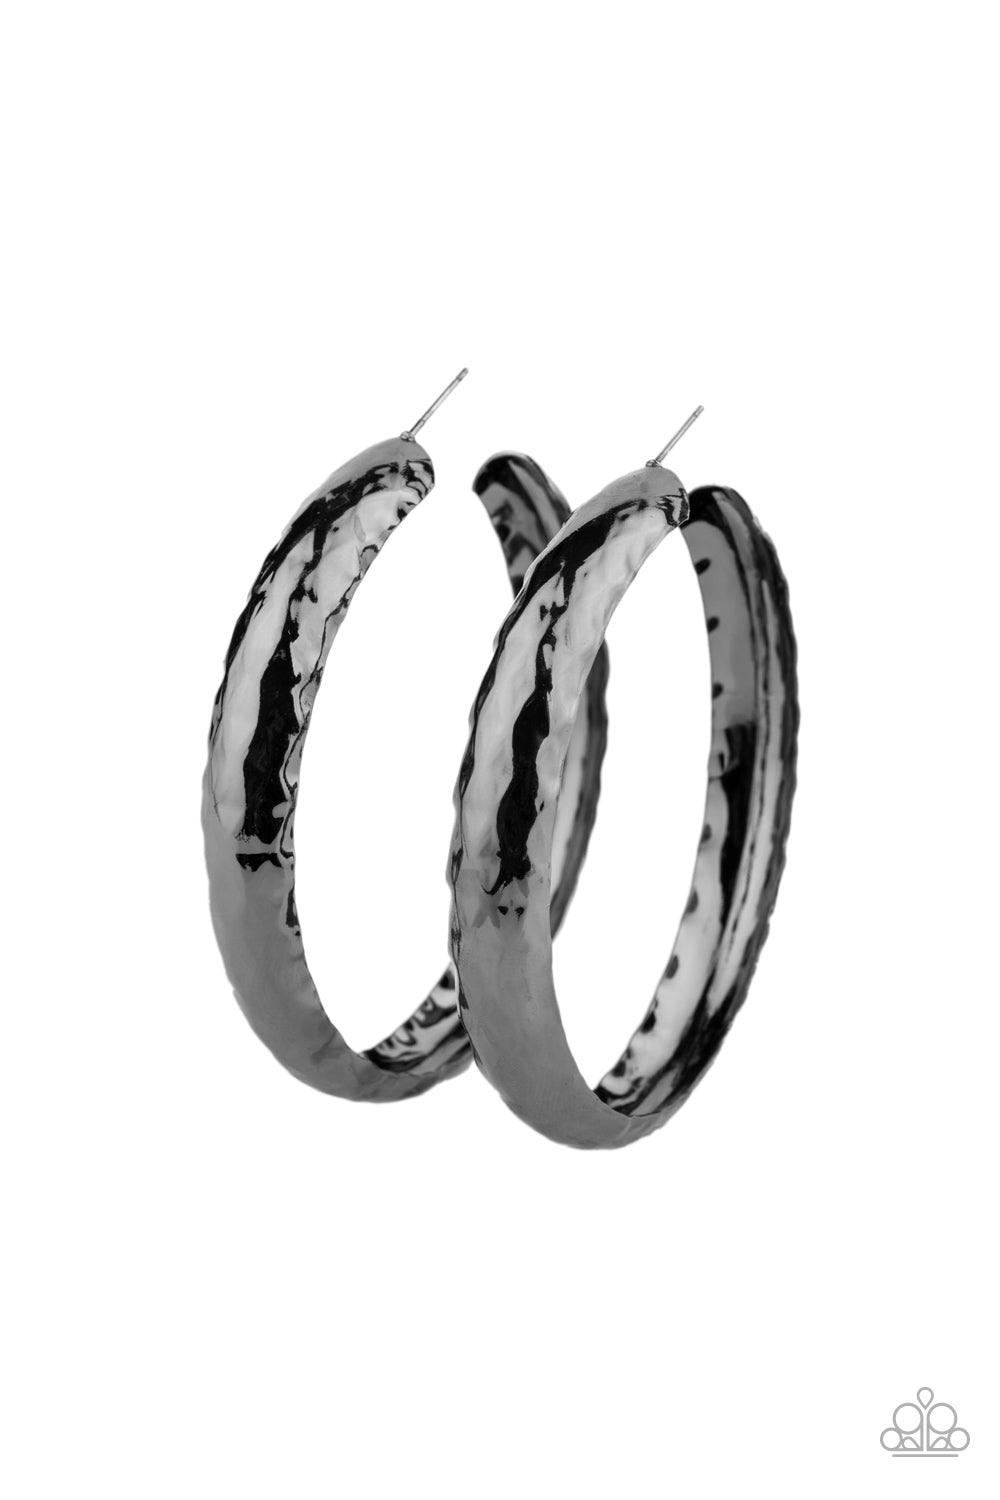 Check Out These Curves - Black Earrings